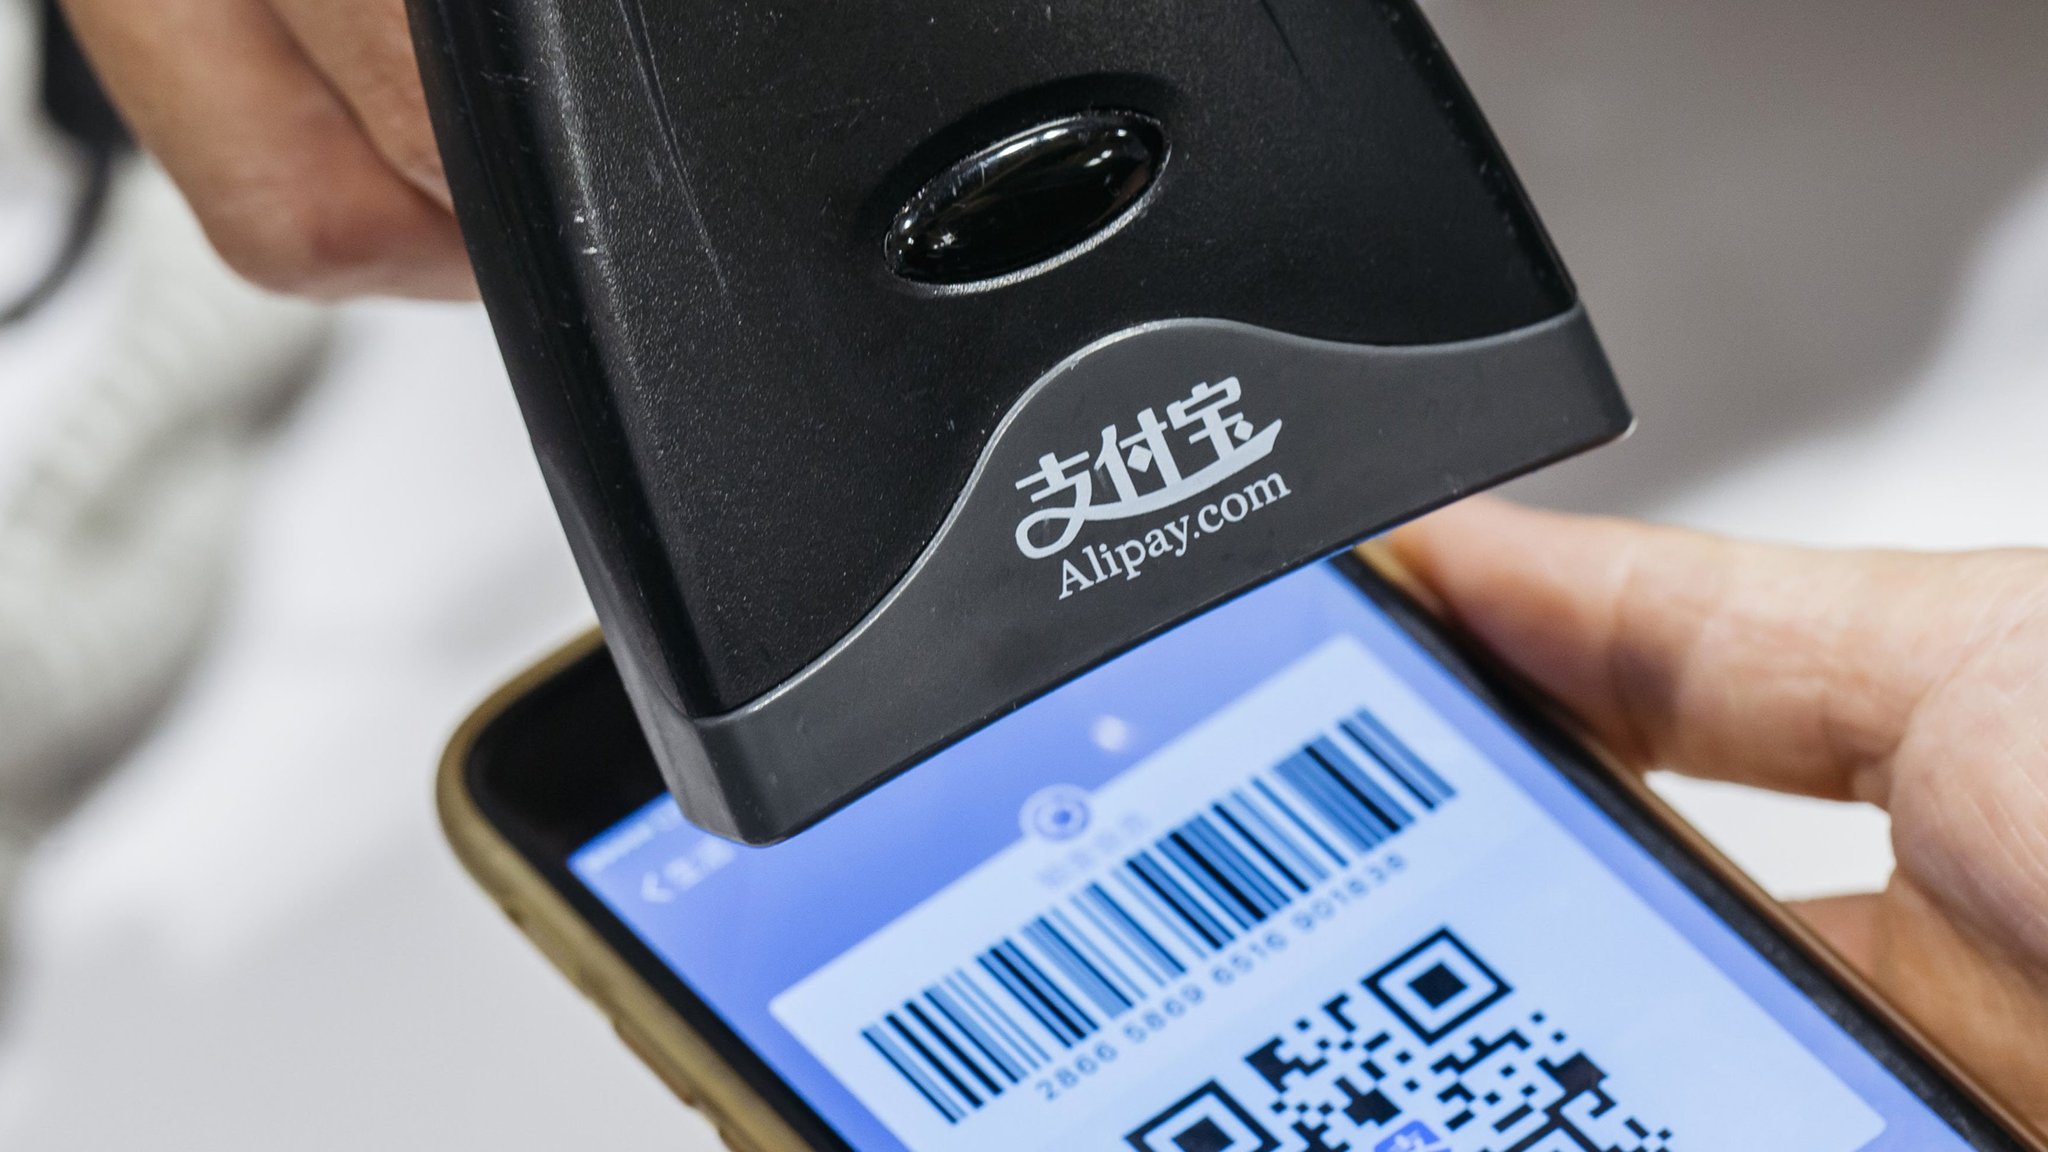 Alipay sets sights on digital payments outside Asia as it teams up with Russia’s Mail.ru